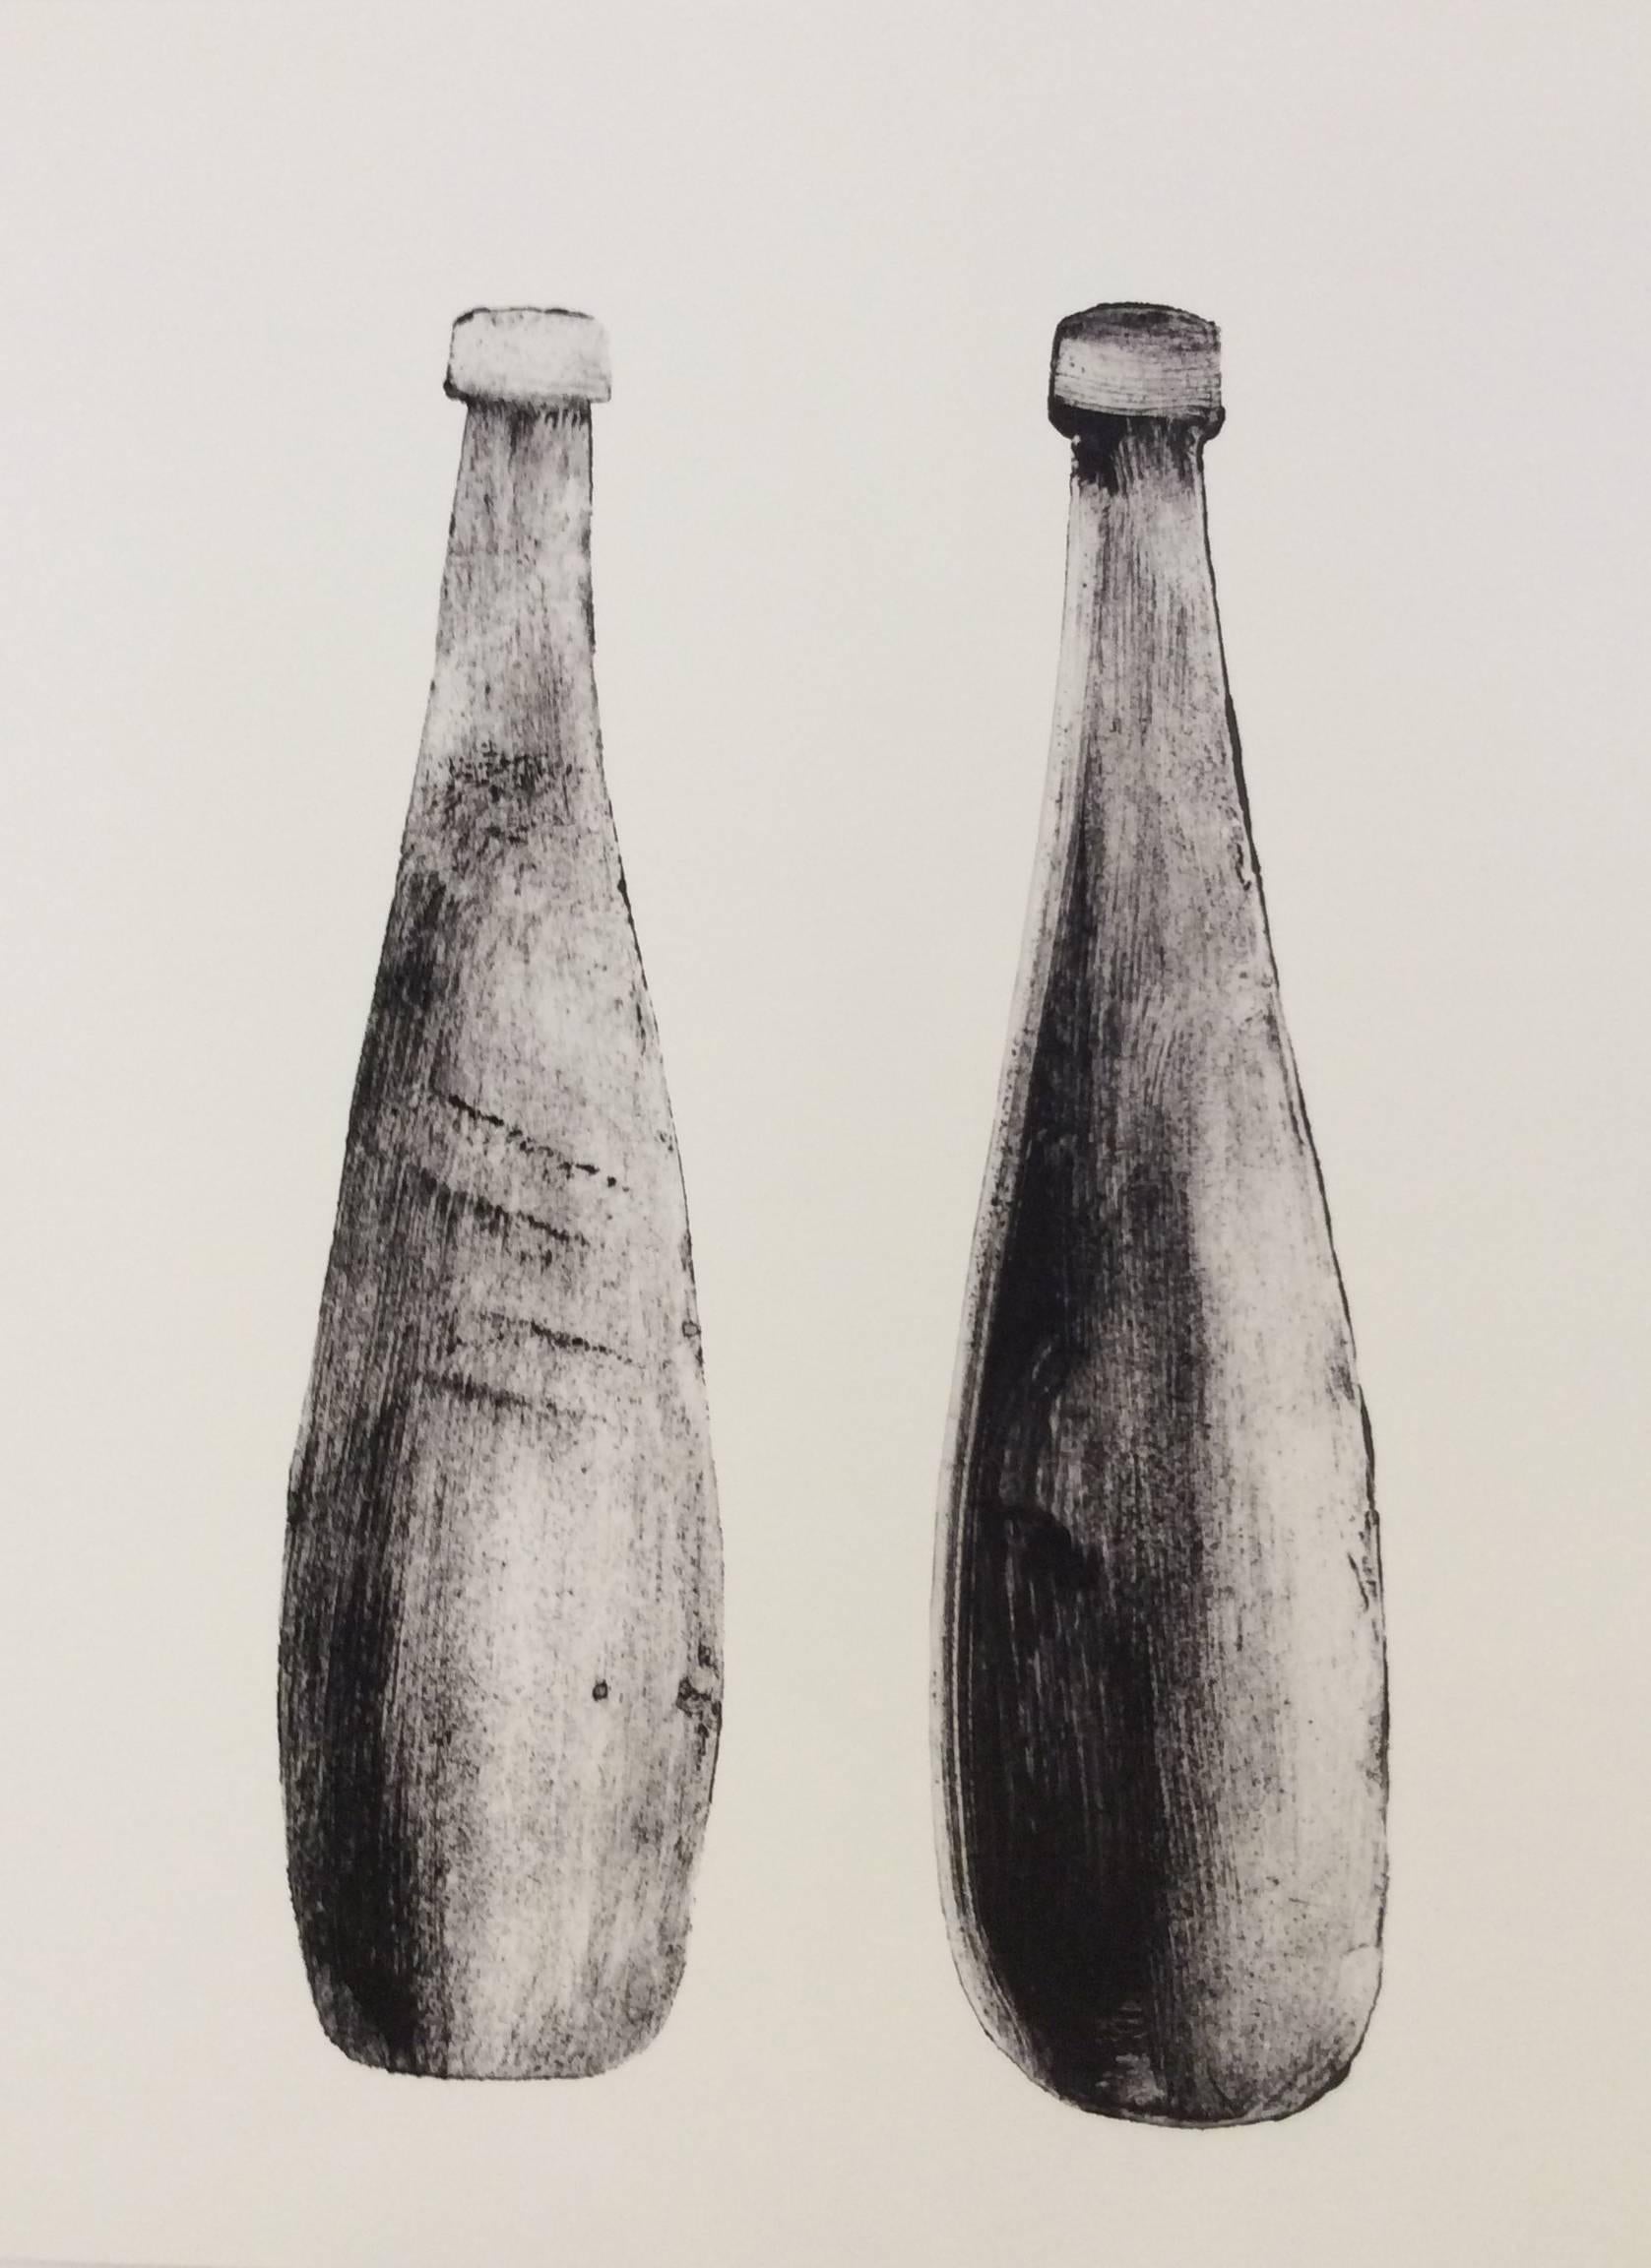 Morandi Series II - Bottles, 2017
Giclee print on archival paper
24 x 18 x .07 inches
Signed on reverse
Ed. 1/10

This black and white giclée print evokes rustic simplicity with its depiction of two narrow bottles on a plain white background. The